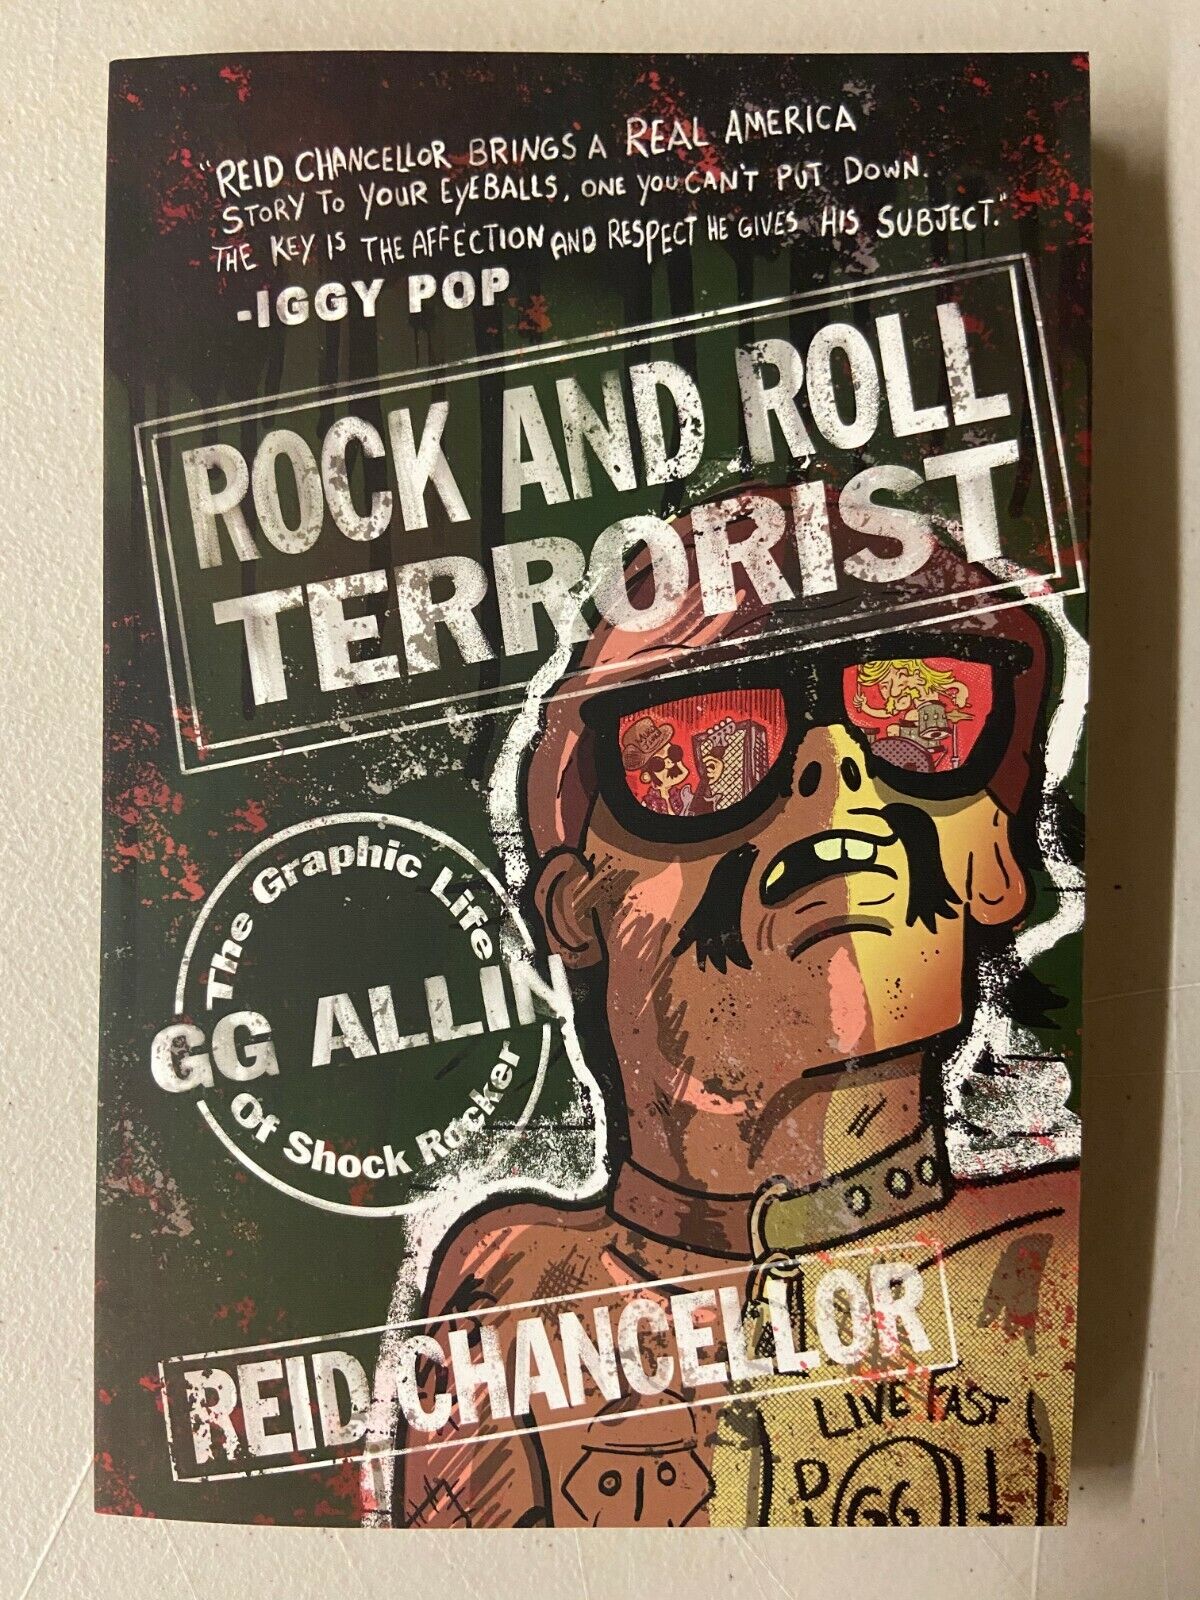 Rock and Roll Terrorist The Graphic Story of Shock Rocker Gg Allin Comix Journal